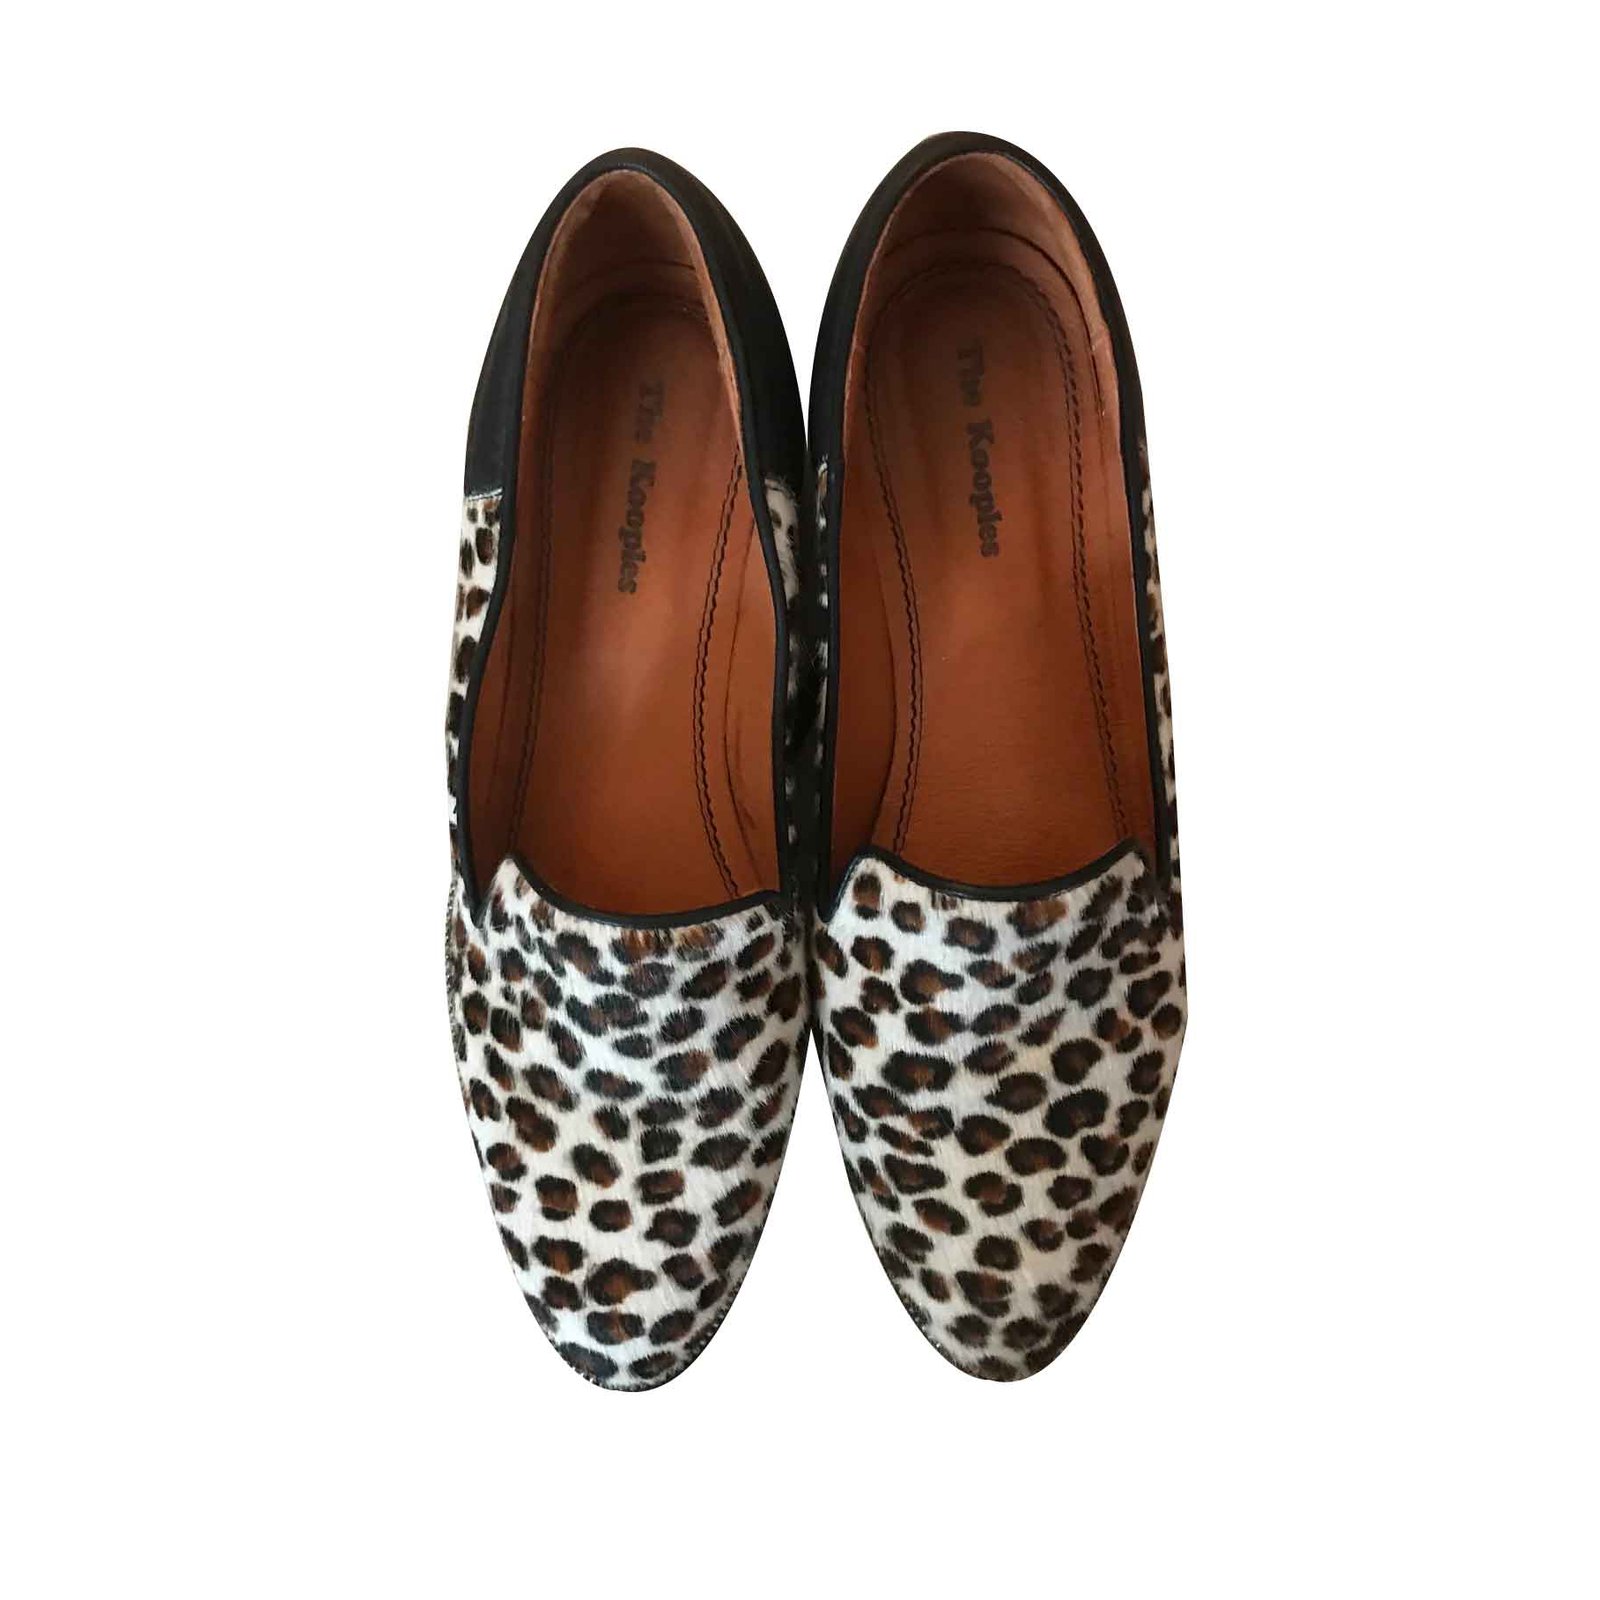 leather leopard flats